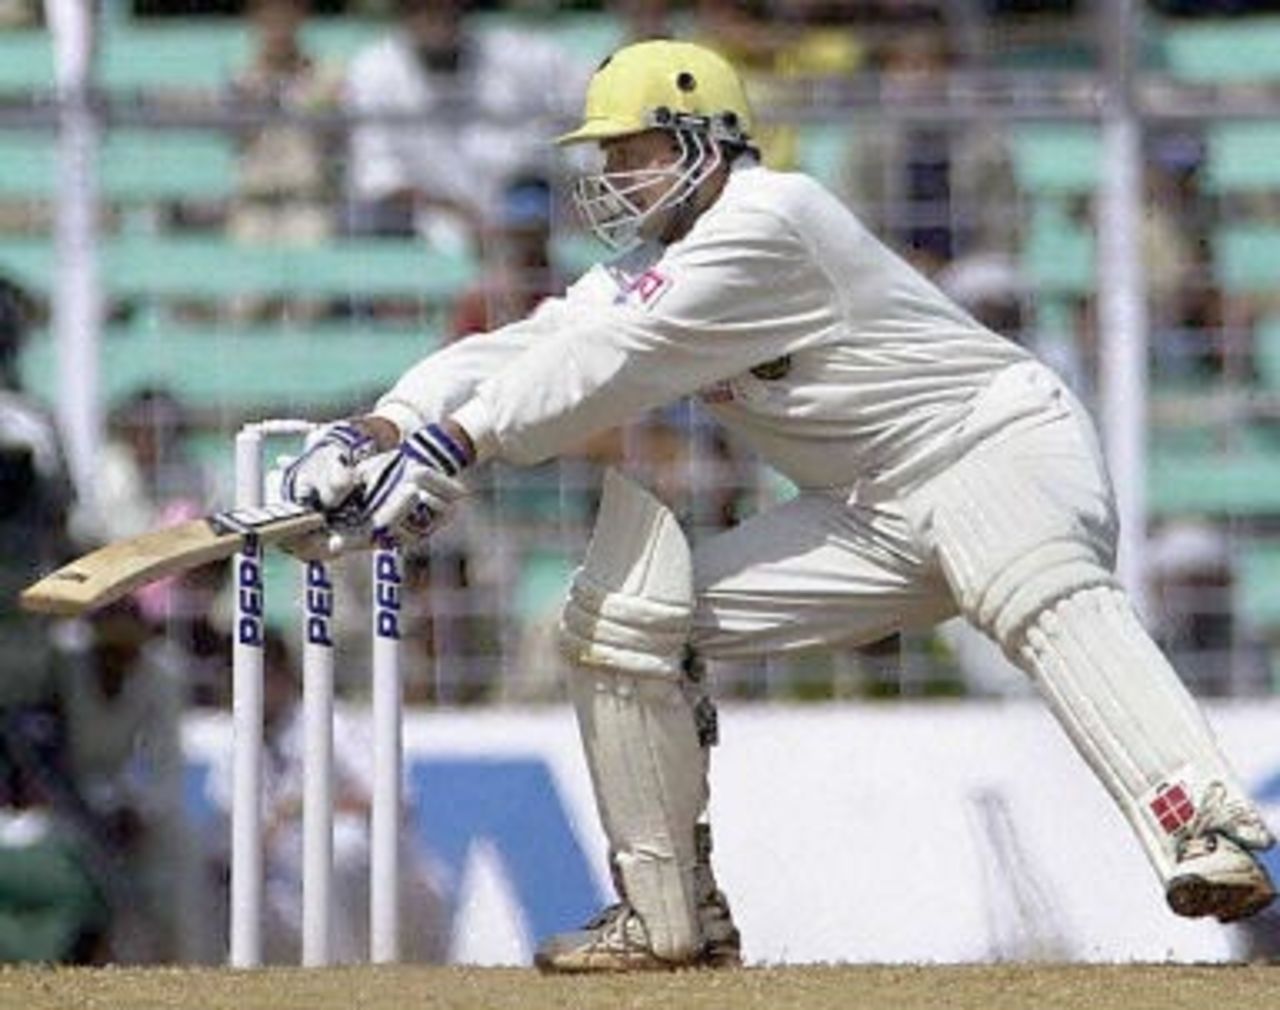 India batsman Nayan Mongia slashes at a delivery from Australian bowler Jason Gillepsie during the third day's play of the first test match between India and Australia at the Wankhade stadium in Mumbai 01 March 2001. Mongia scored a fighting 29 runs however India collapsed at 219 and face an almost certain defeat.